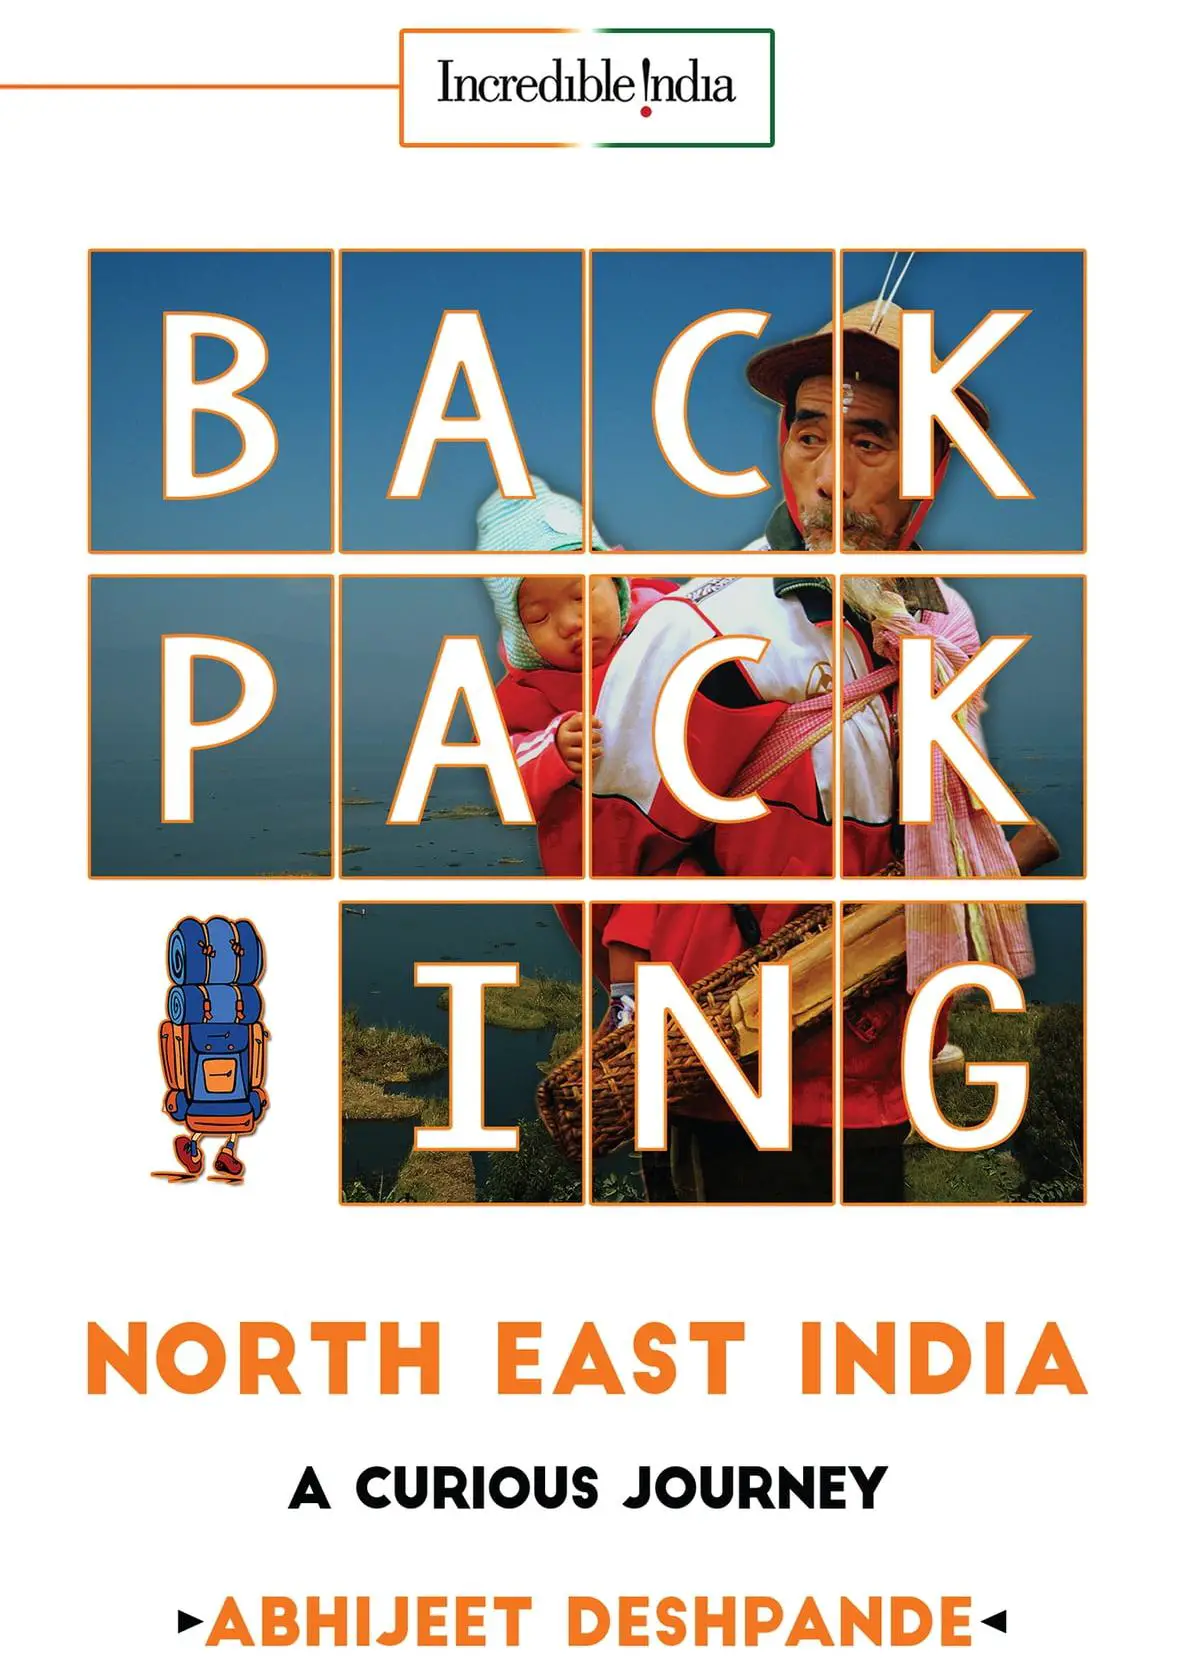 backpacking north east india